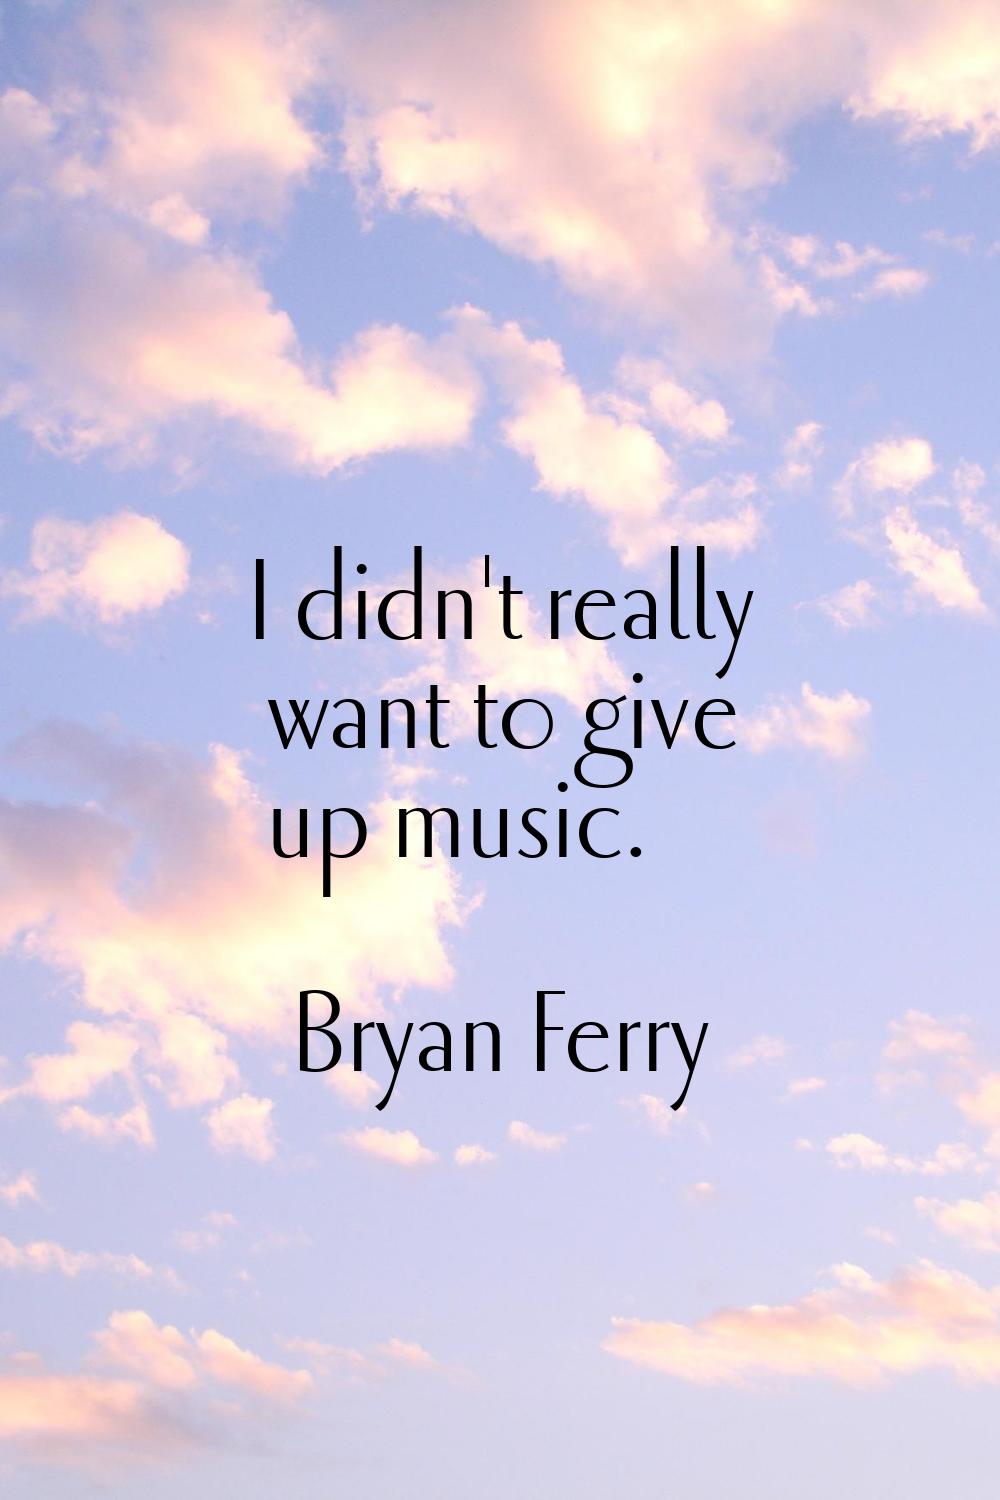 I didn't really want to give up music.